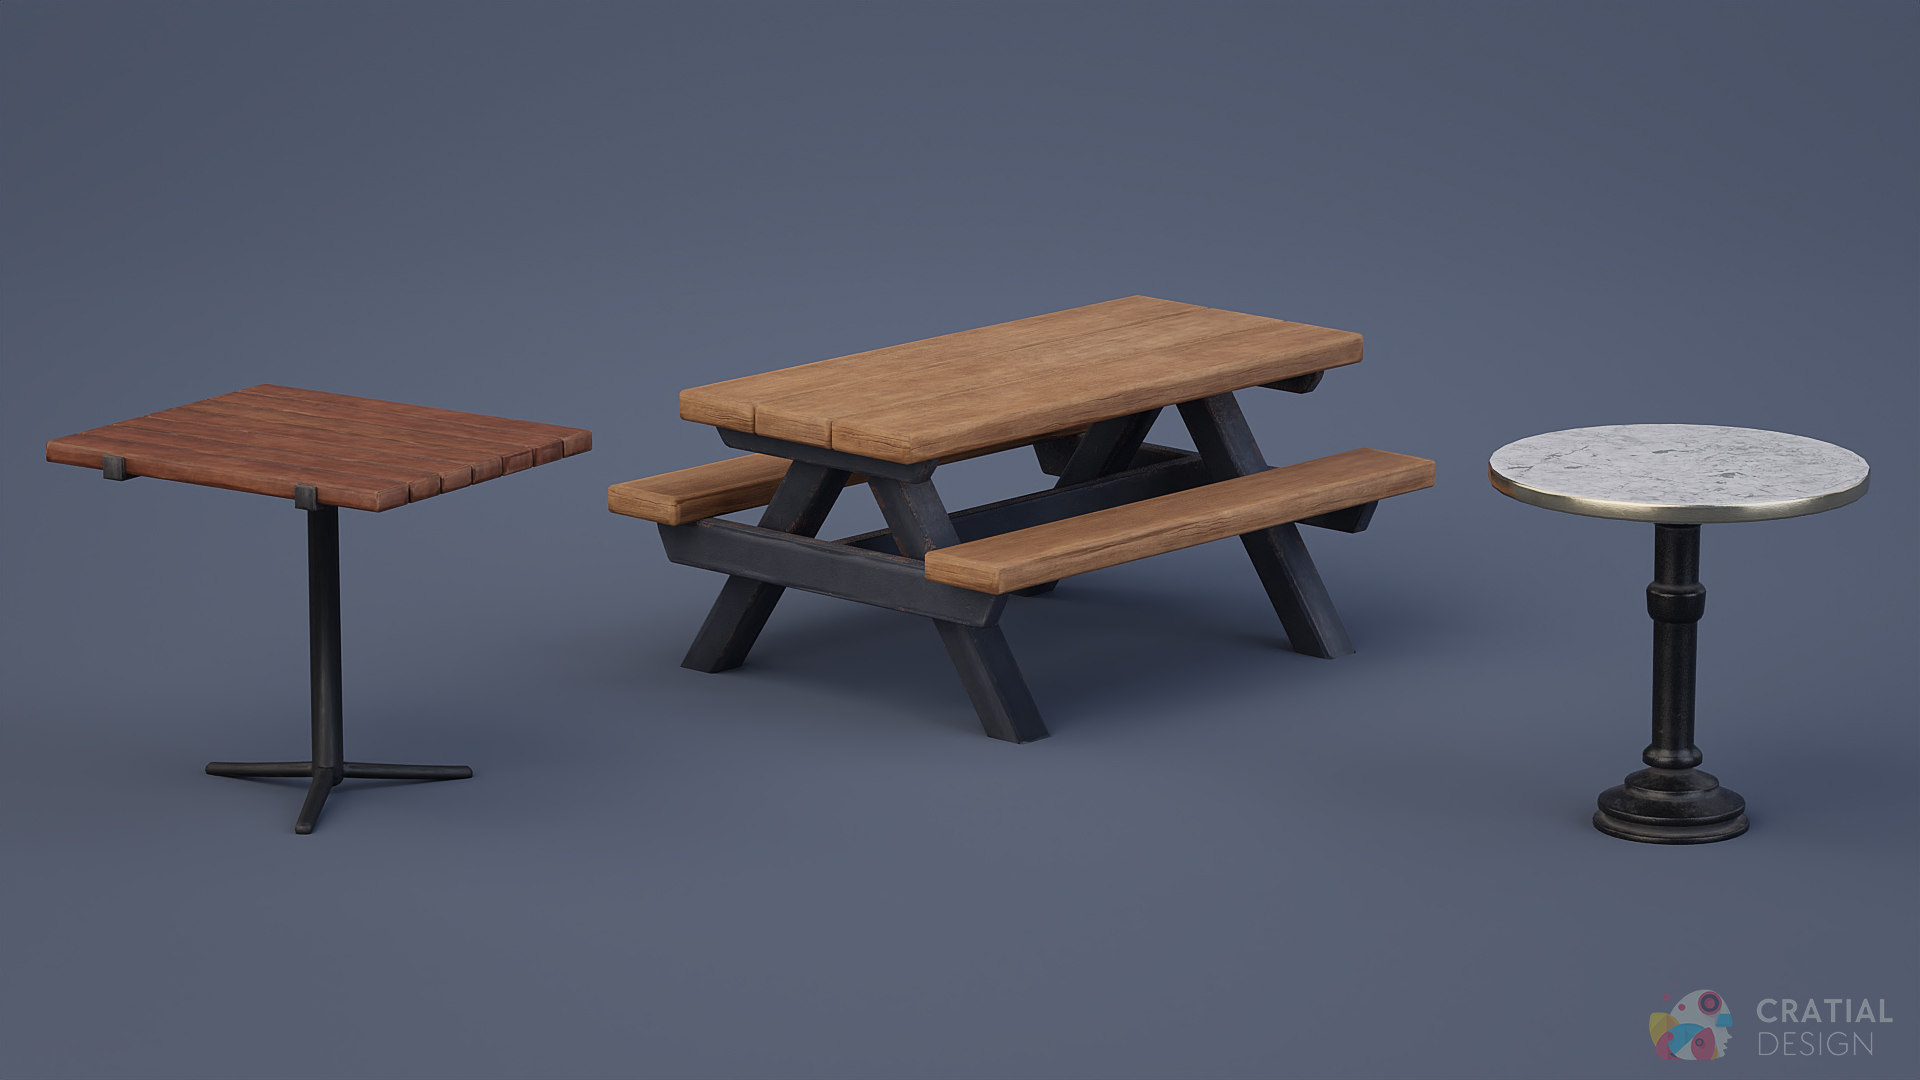 Cratial 3D - Stylized Picnic Table and Patio 3D Models